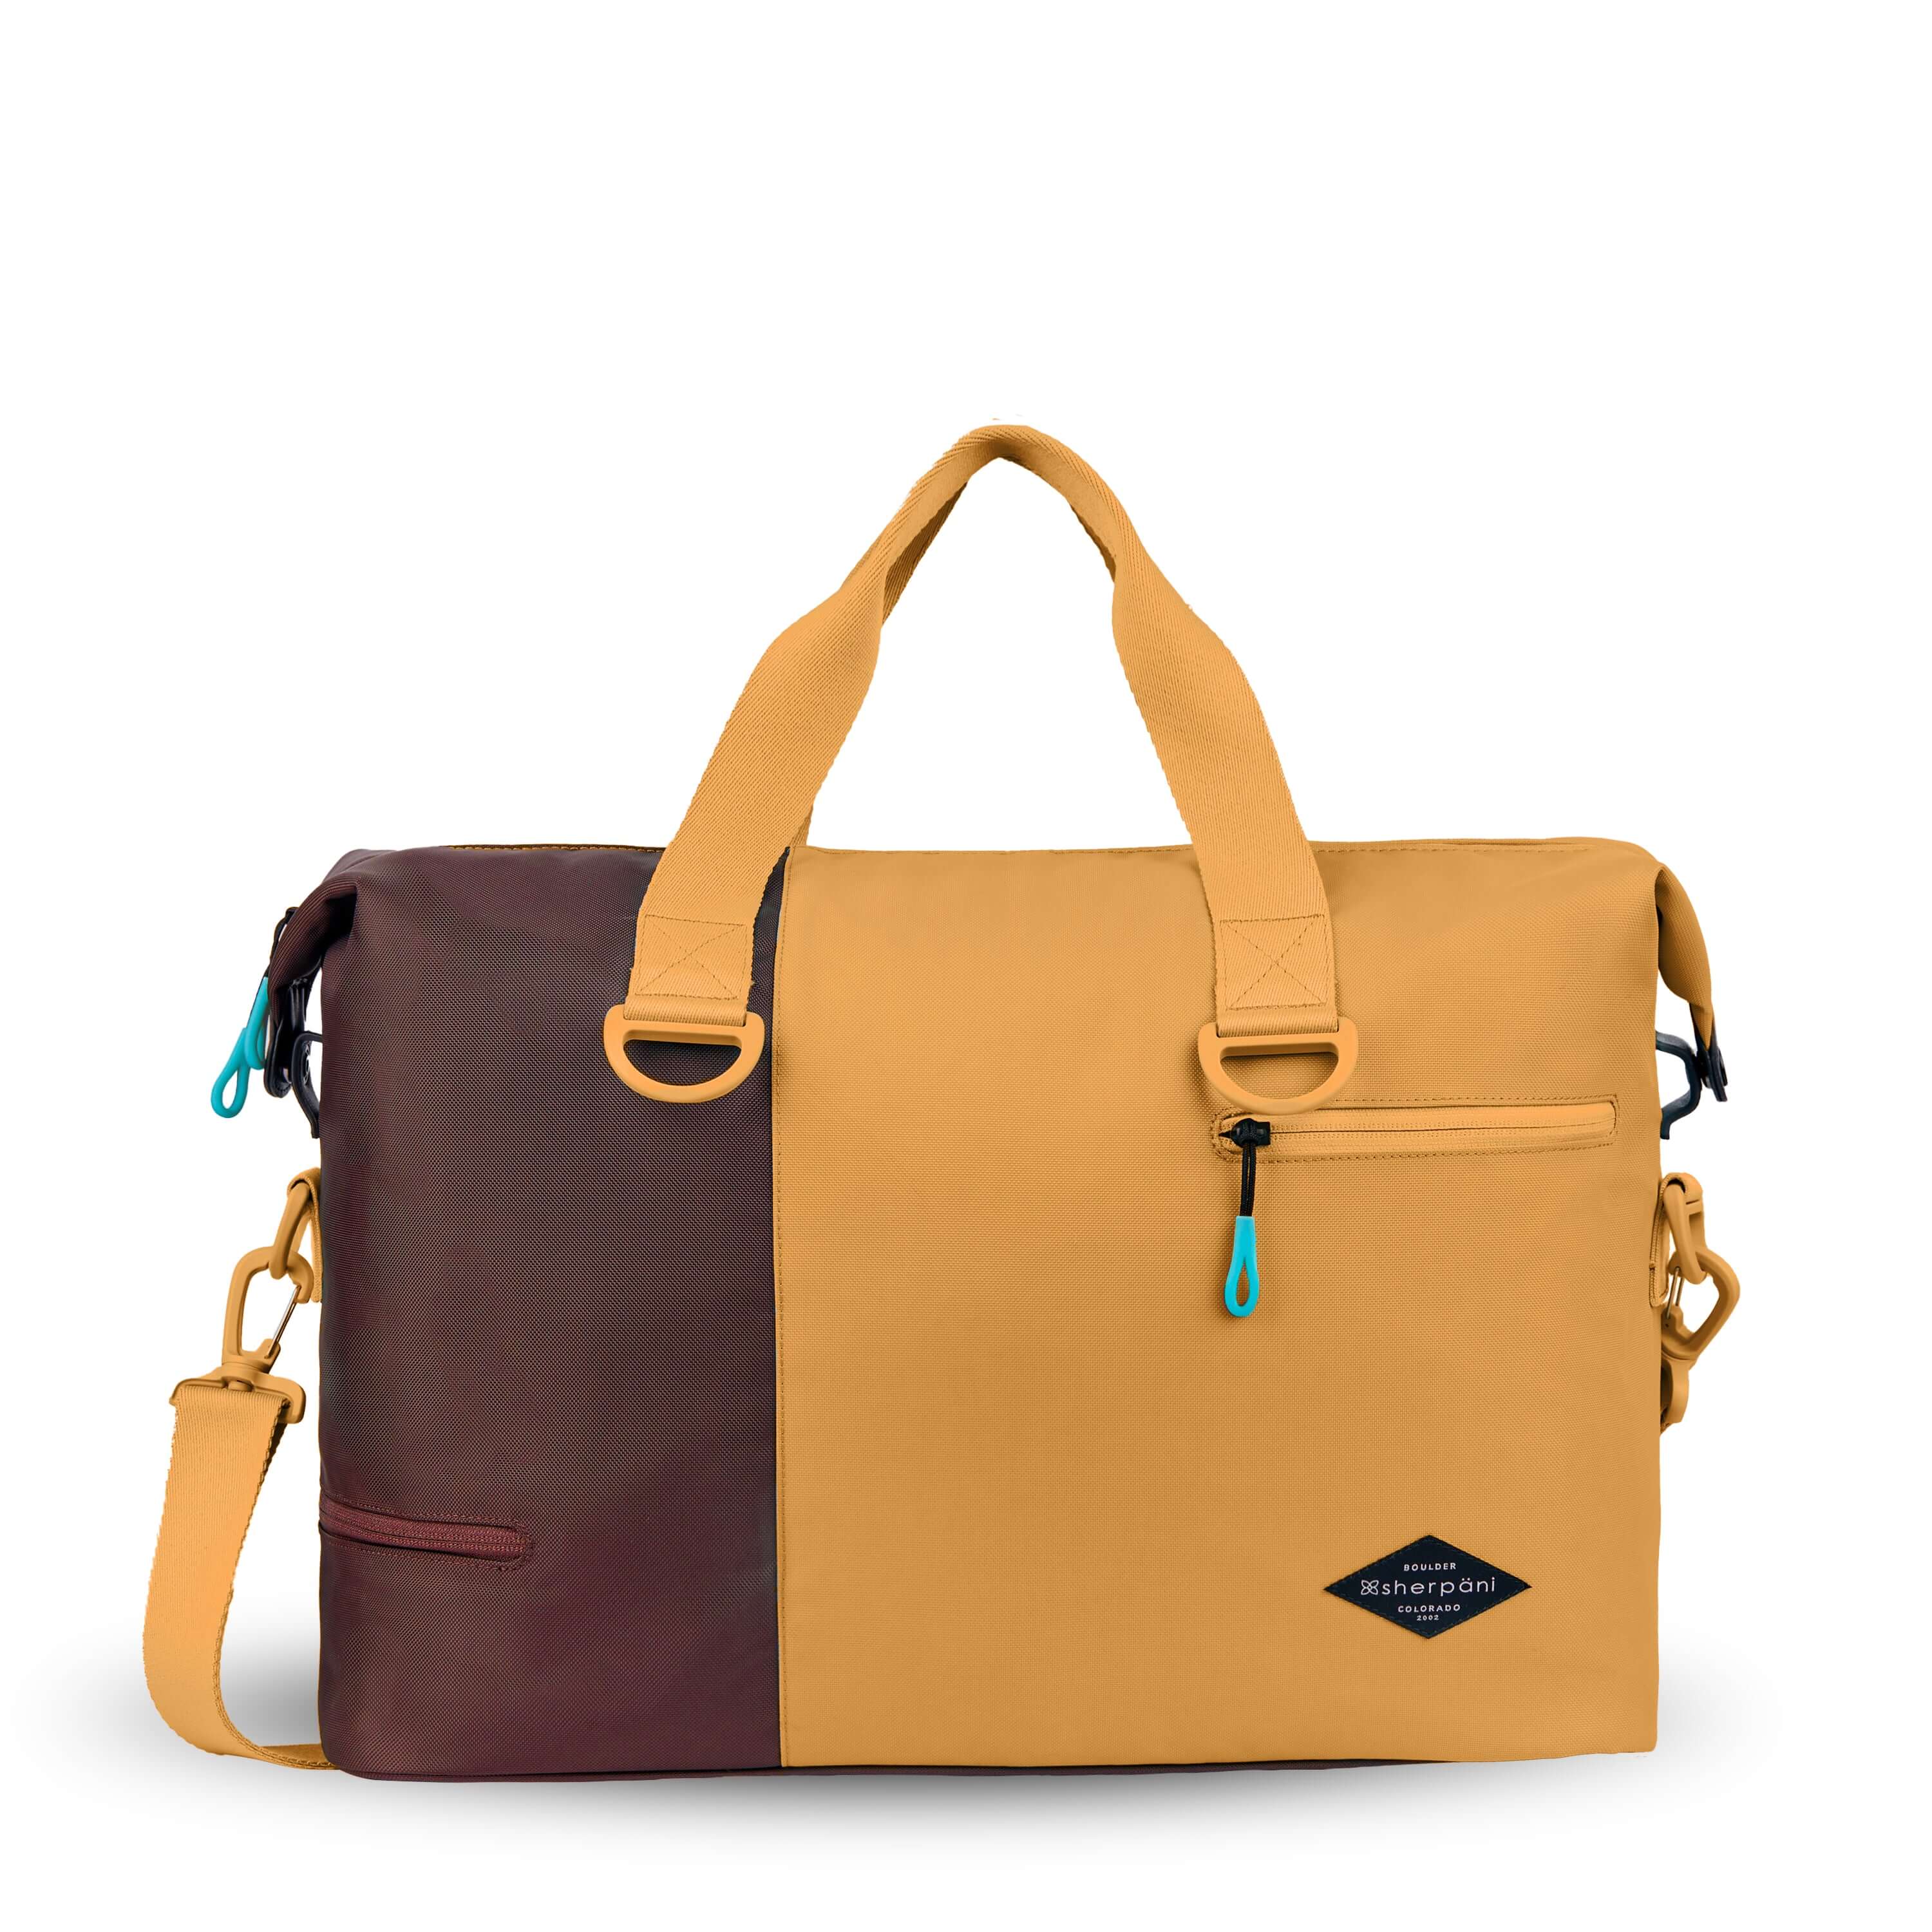 Flat front view of Sherpani bag, the Sola in Sundial. The bag is two-toned in burnt yellow and brown. Two external zipper compartments are visible on the top right and bottom left of the bag. Easy-pull zippers are accented in aqua. The bag has tote handles and an adjustable/detachable crossbody strap.